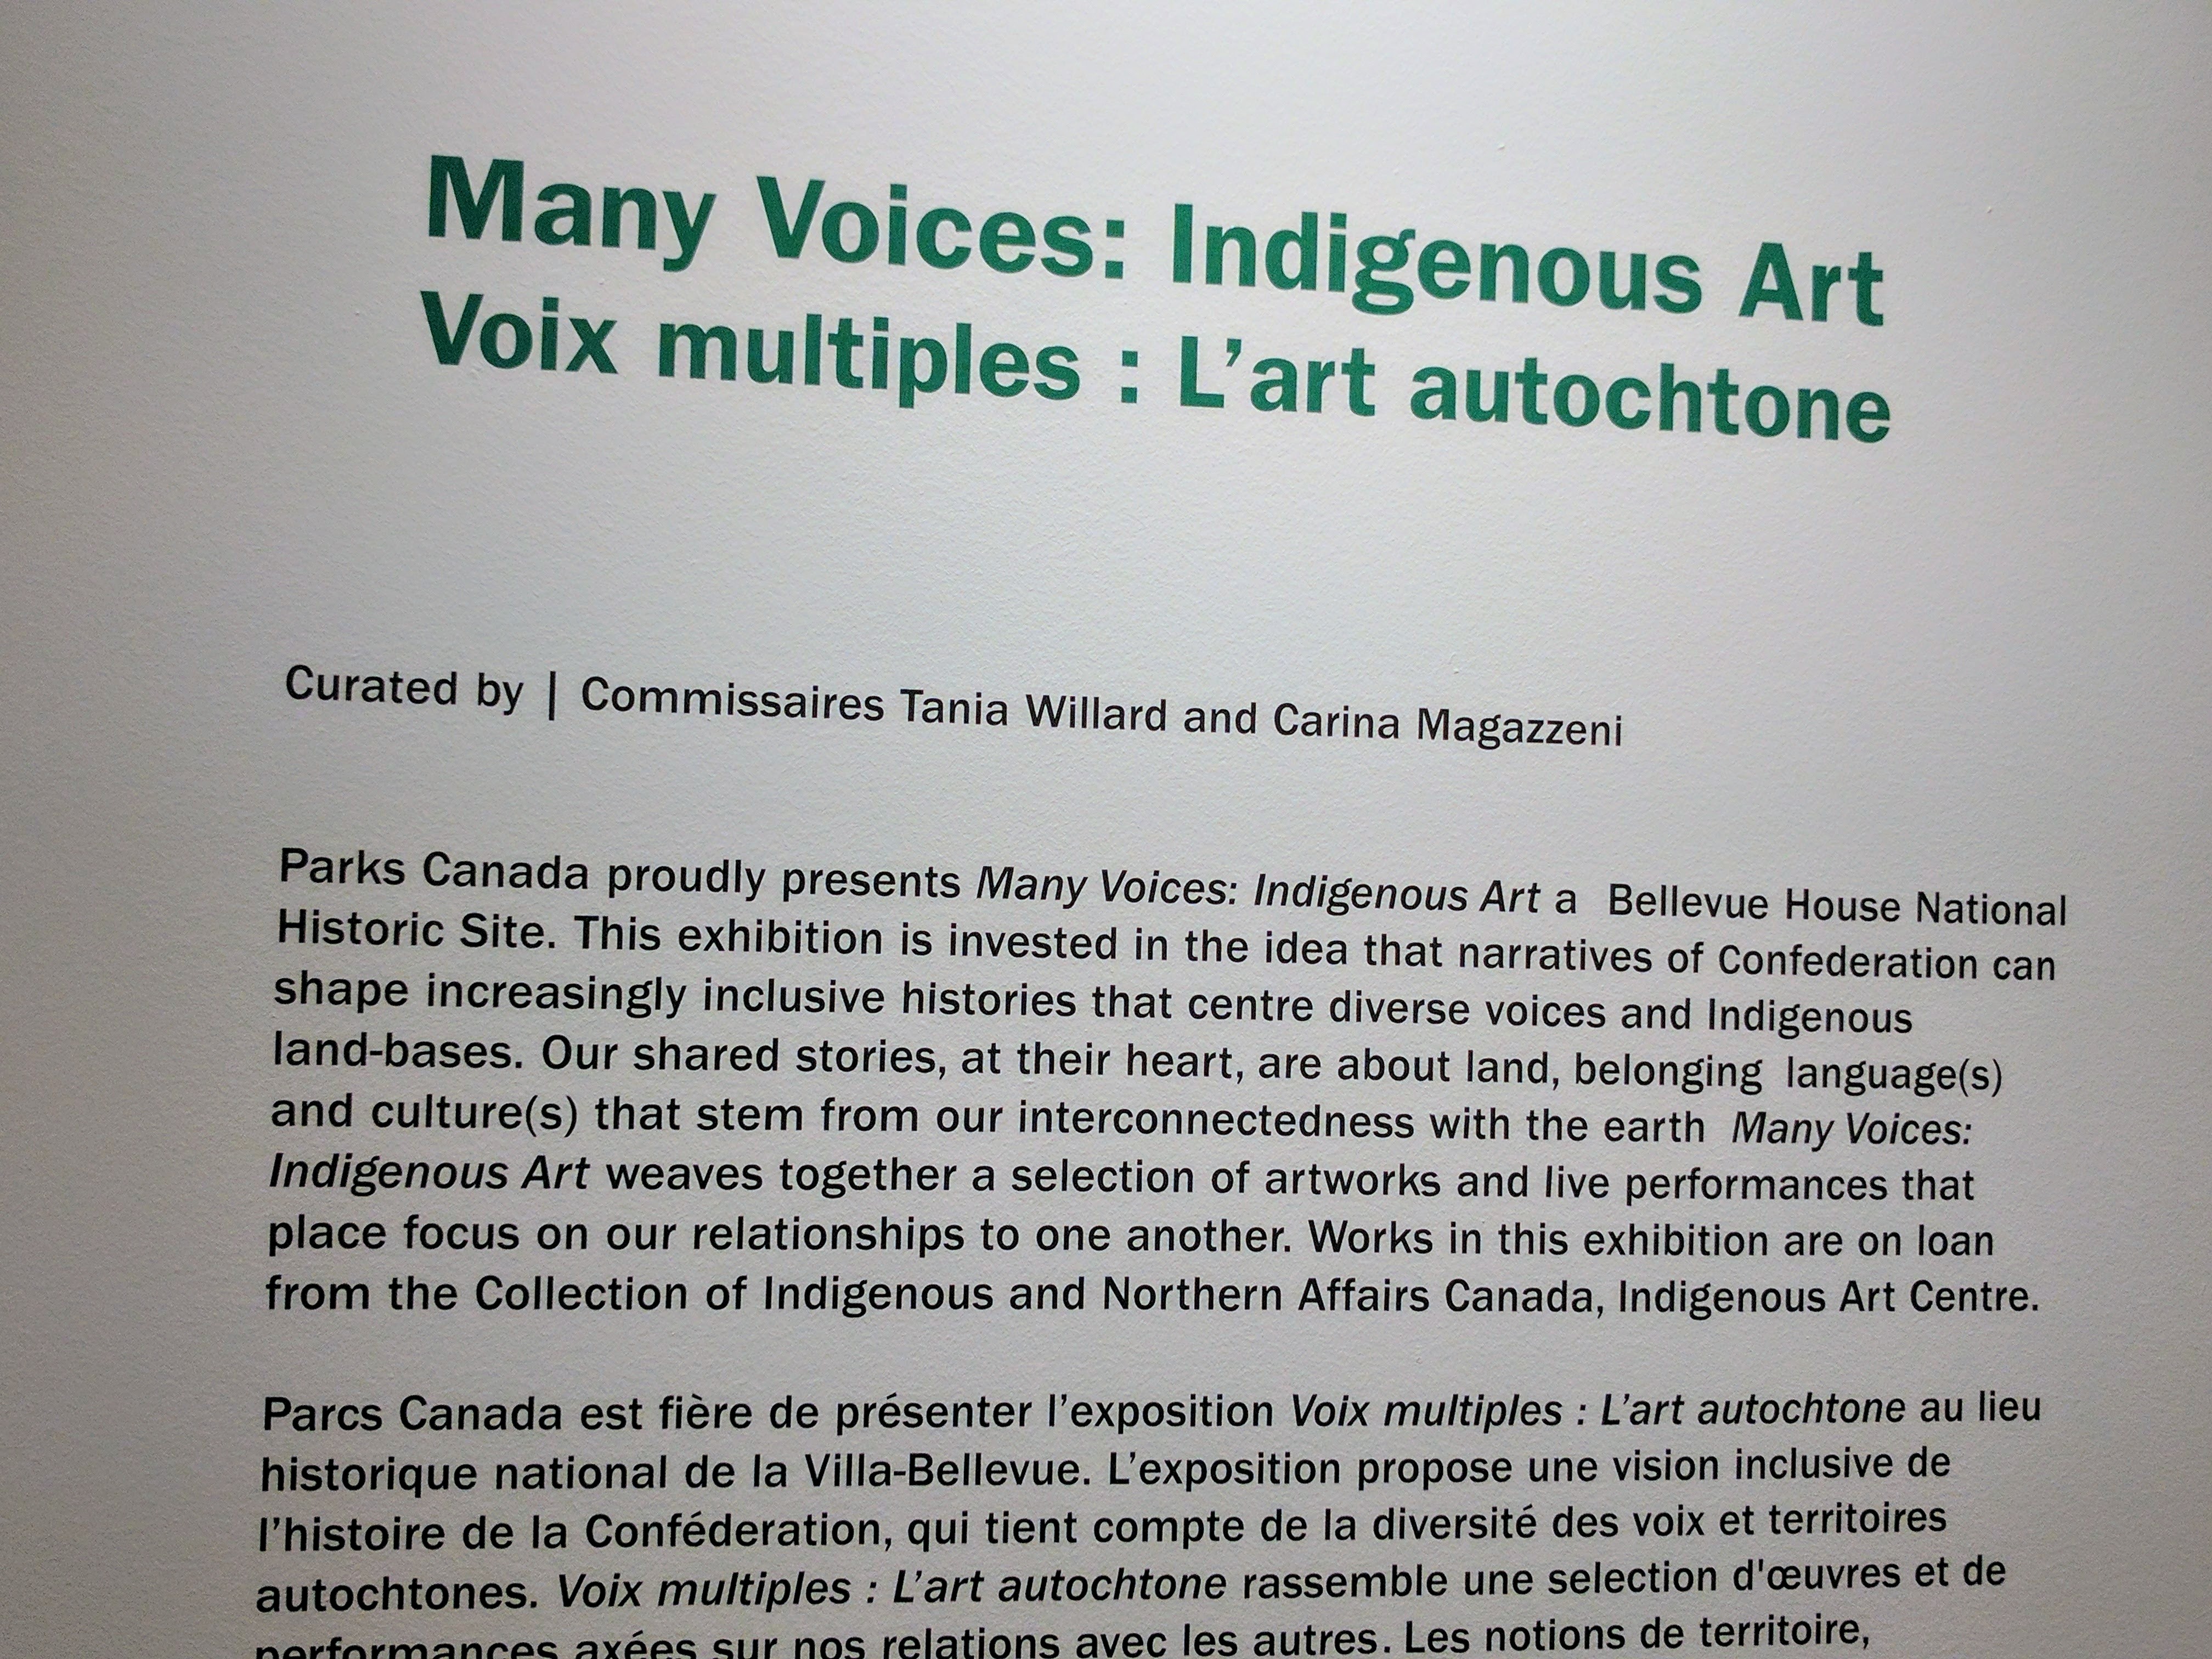 Many Voices: Indigenous Art